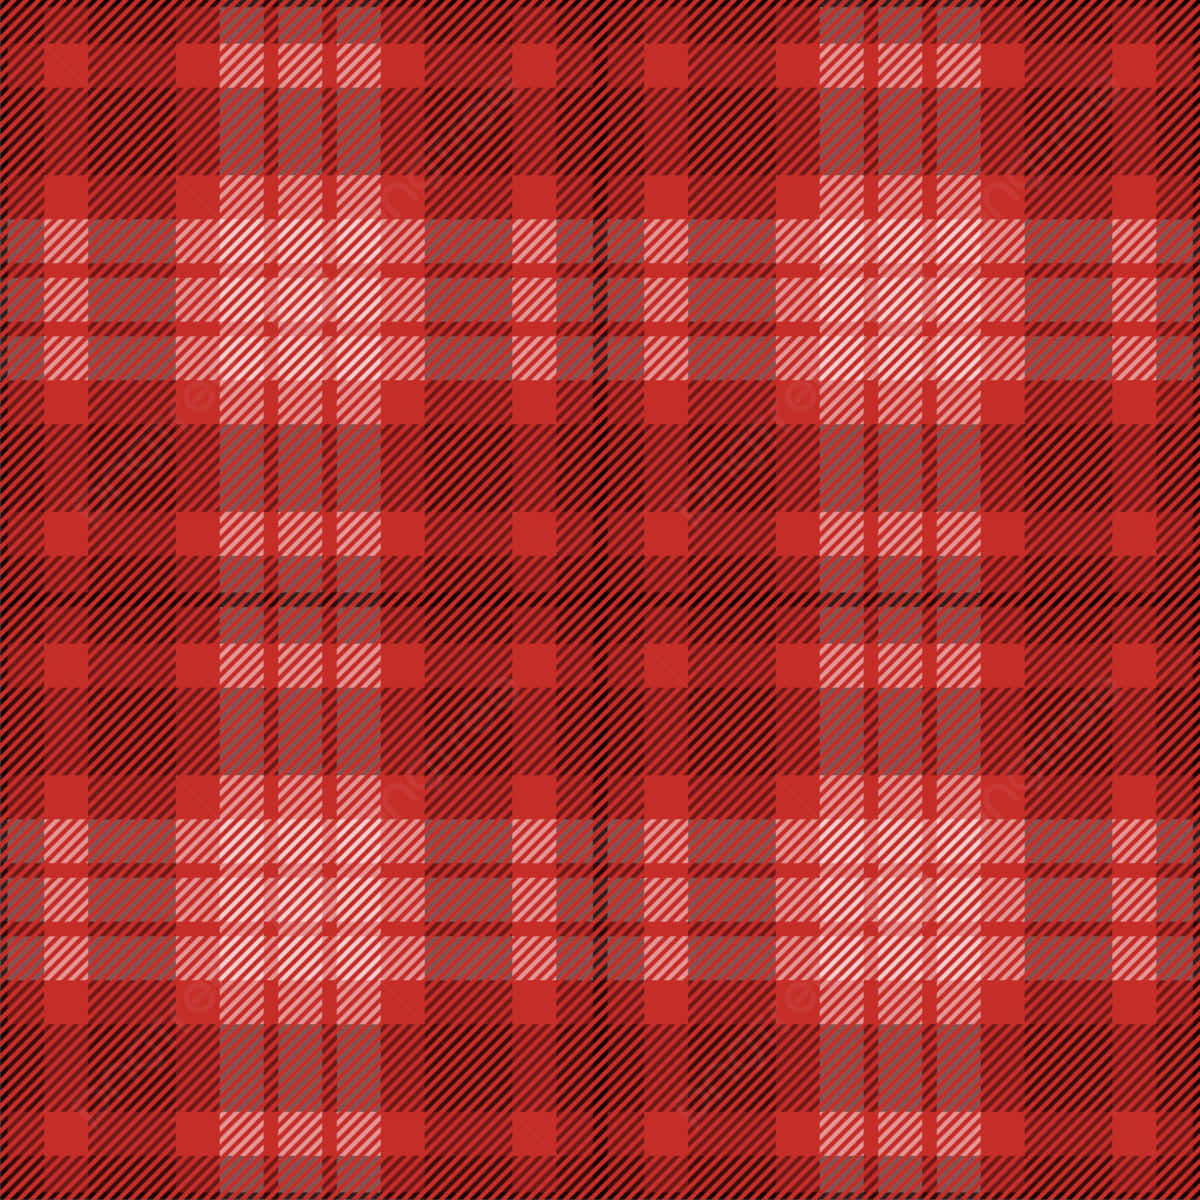 Stylish Black and Red Plaid Wallpaper